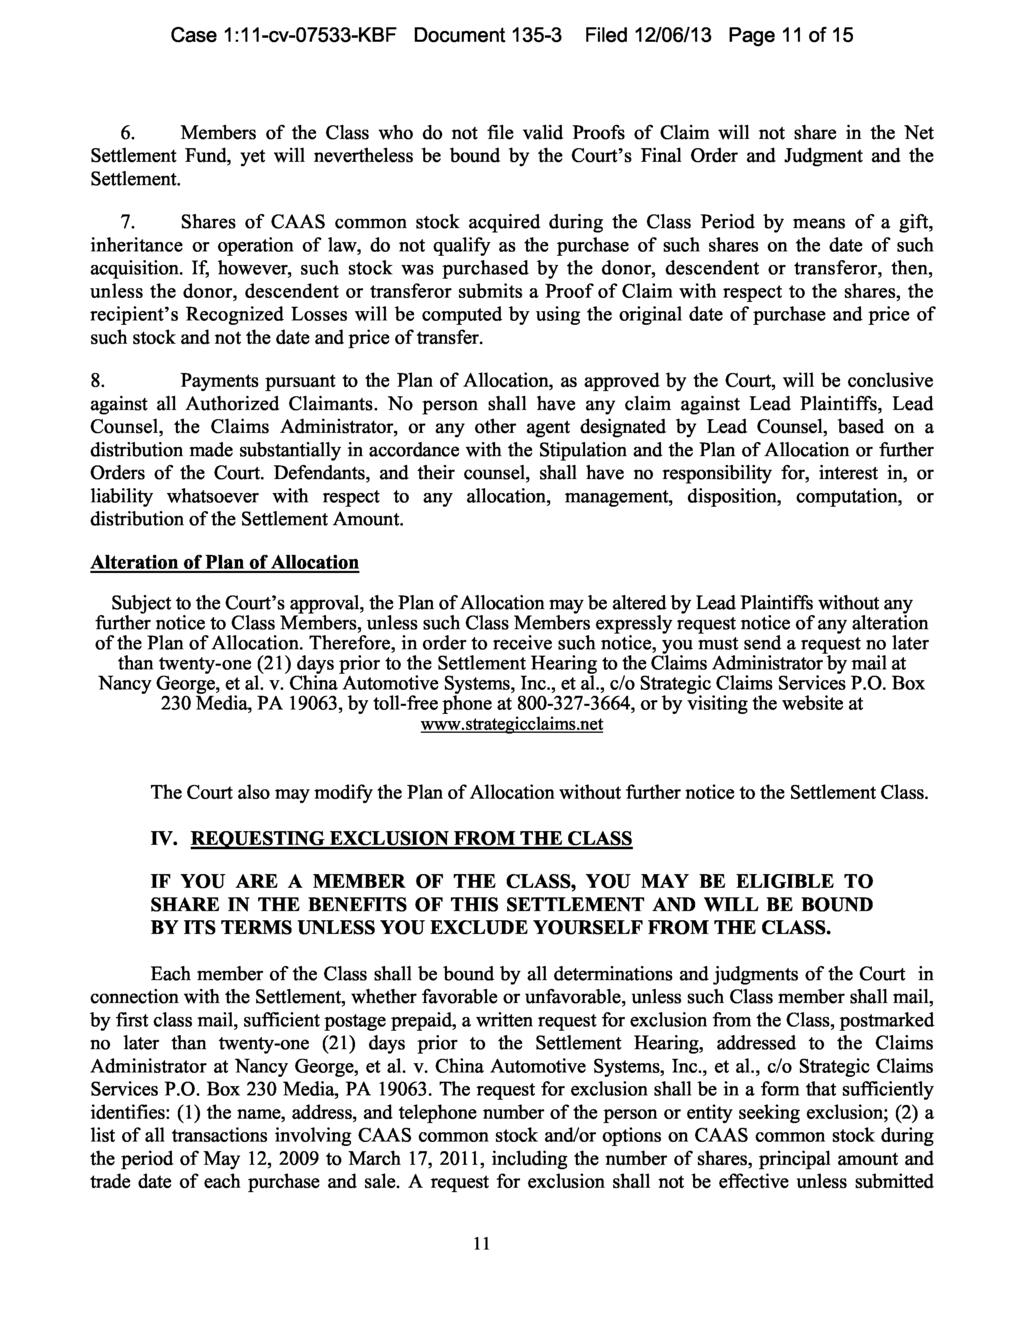 Case 1:11-cv-07533-KBF Document 135-3 Filed 12/06/13 Page 11 of 15 6.